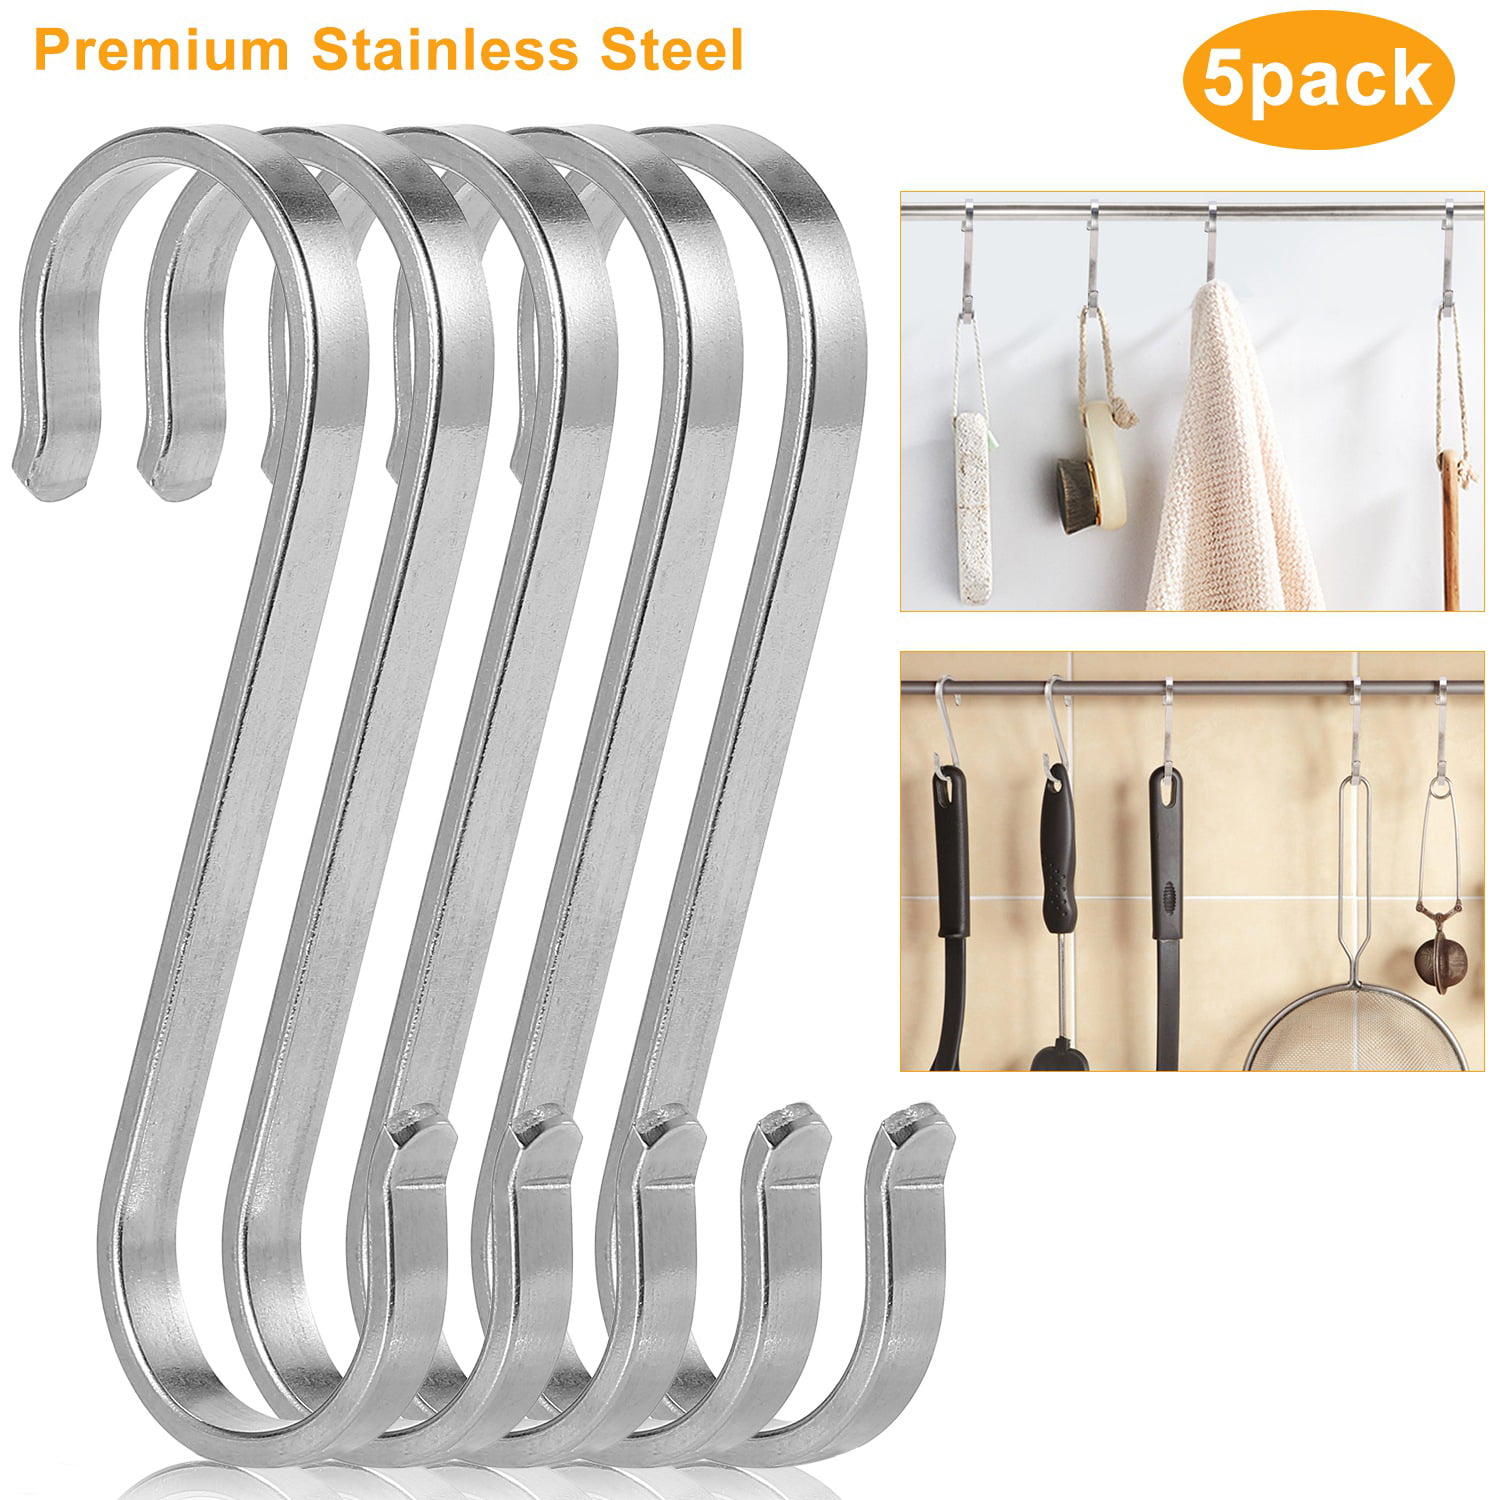 Outdoor LARGE/12 Pack 304 Stainless Steel S Shaped Hook Hanging Hangers for Kitchen Office Bathroom Flat S Hooks Heavy Duty with Upgrade Head